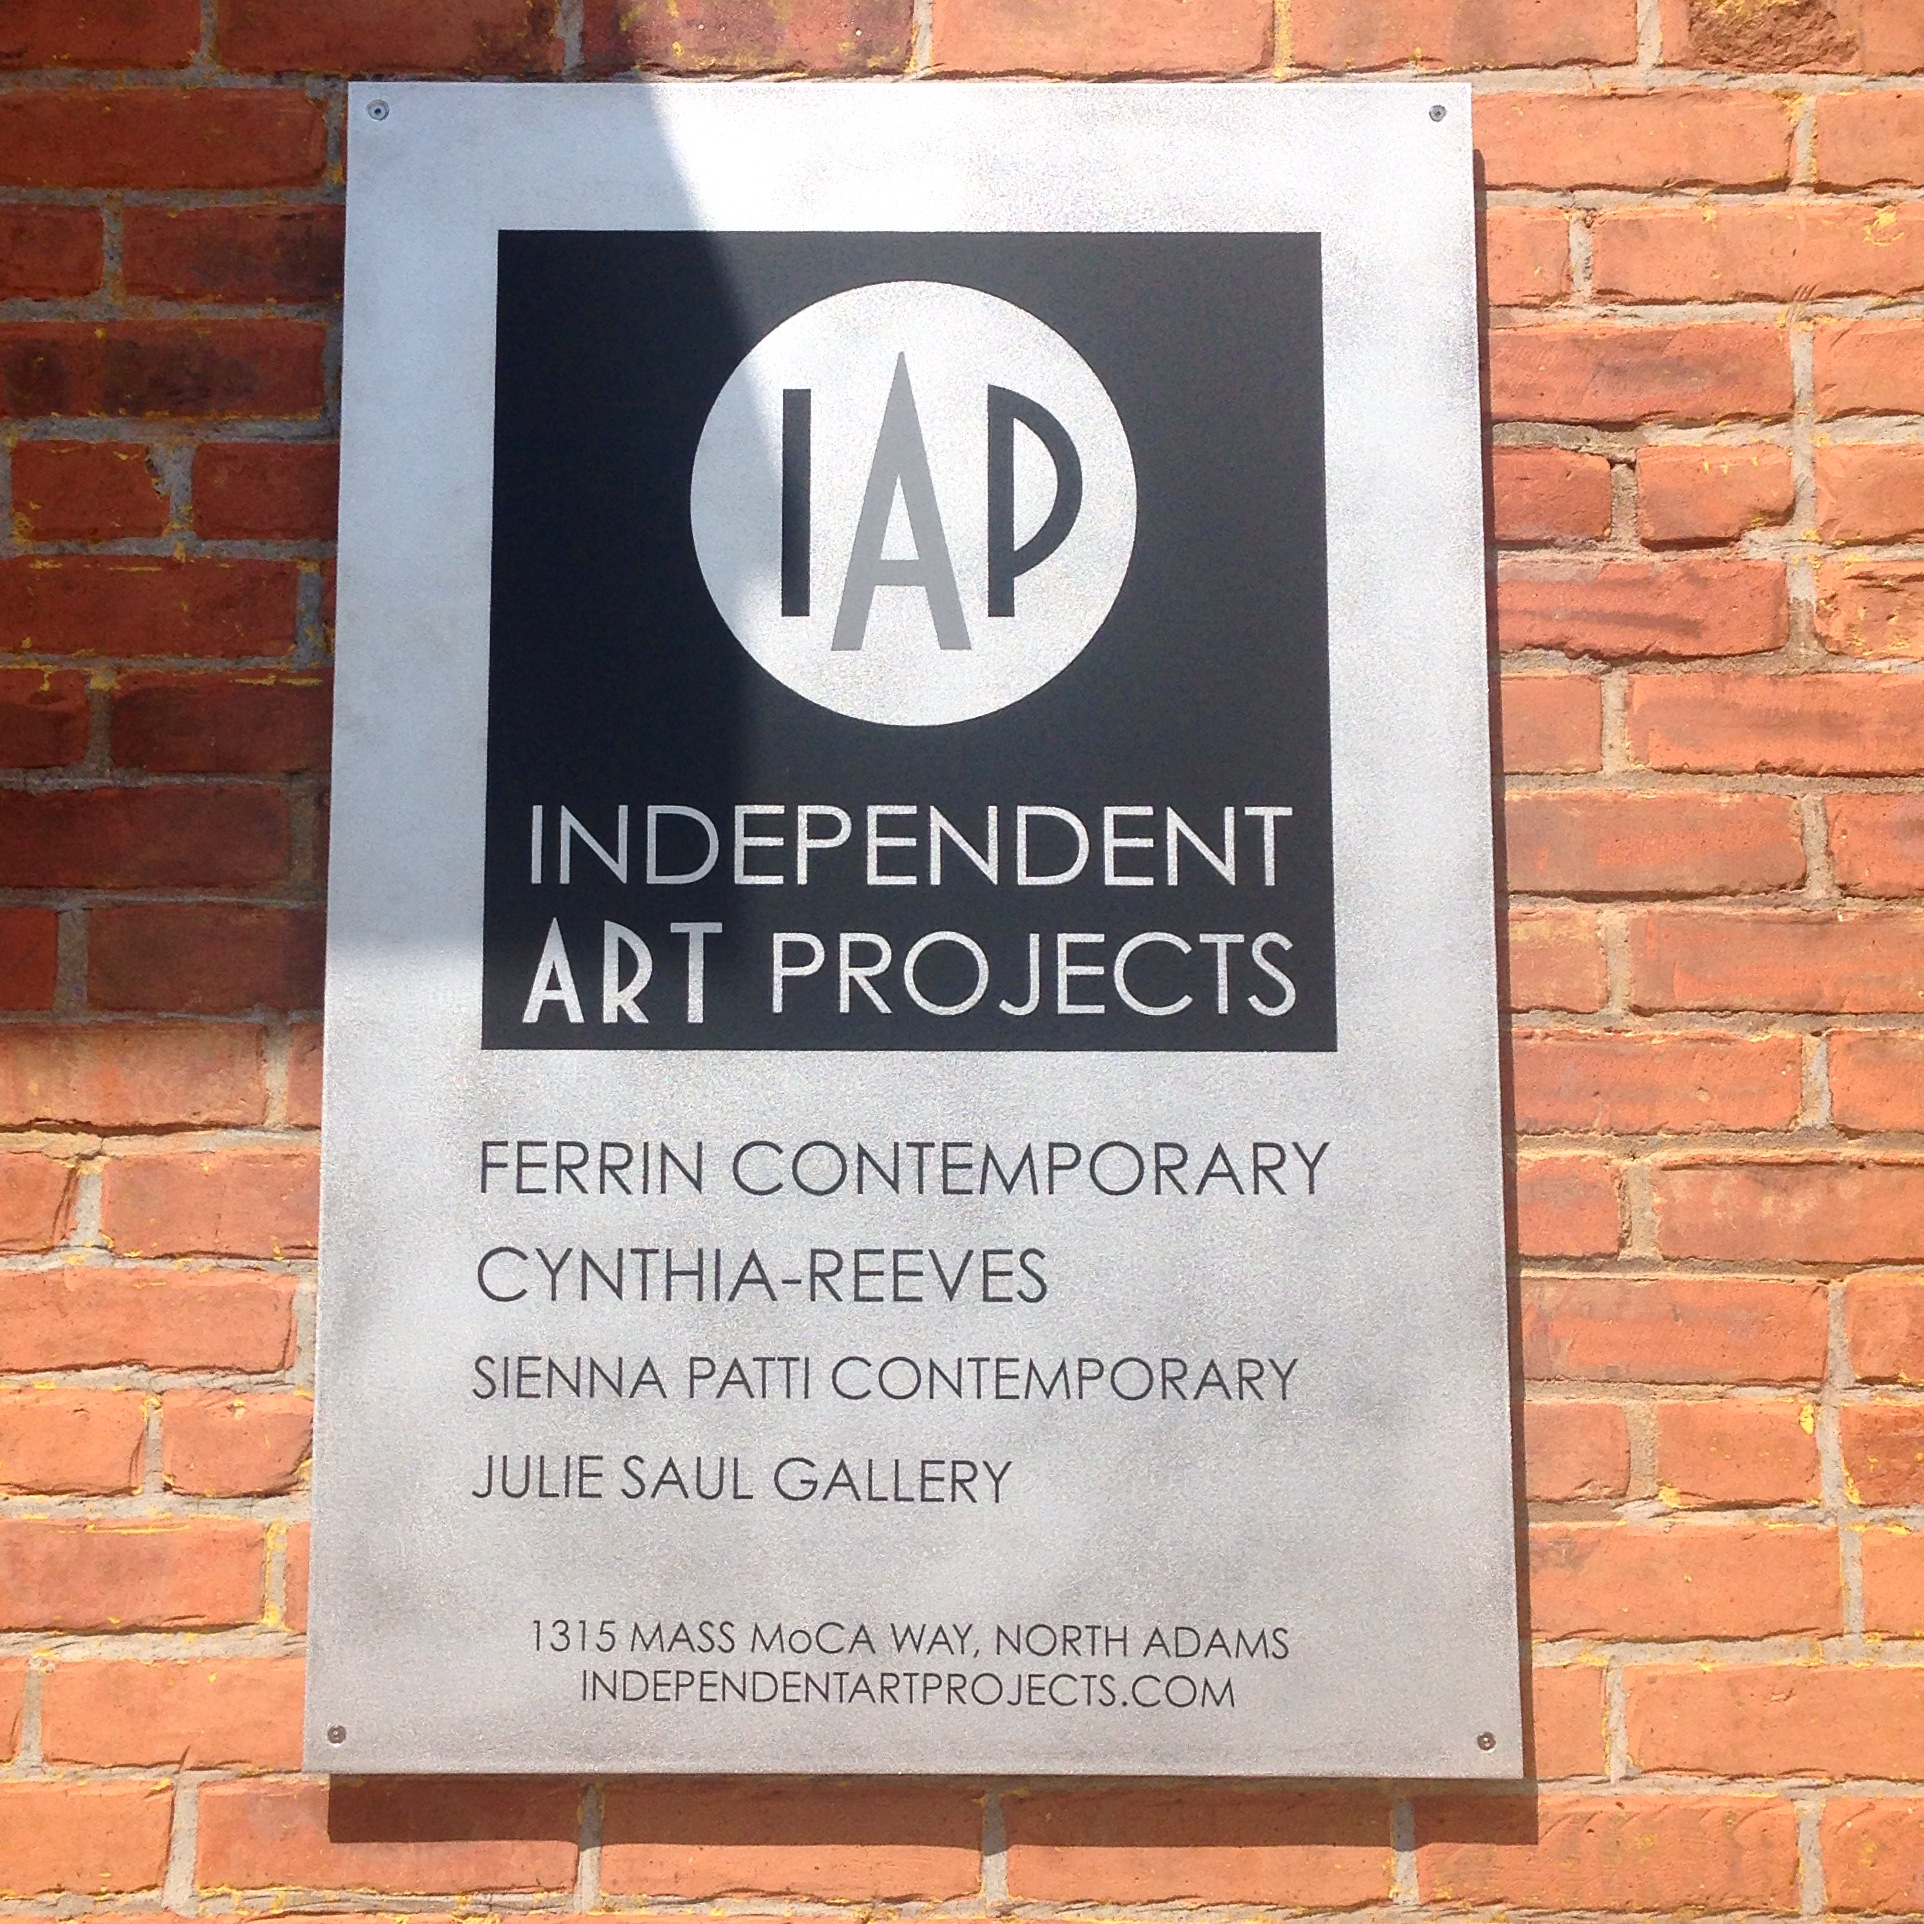 July 2014: New Art Space Celebrates Grand Opening